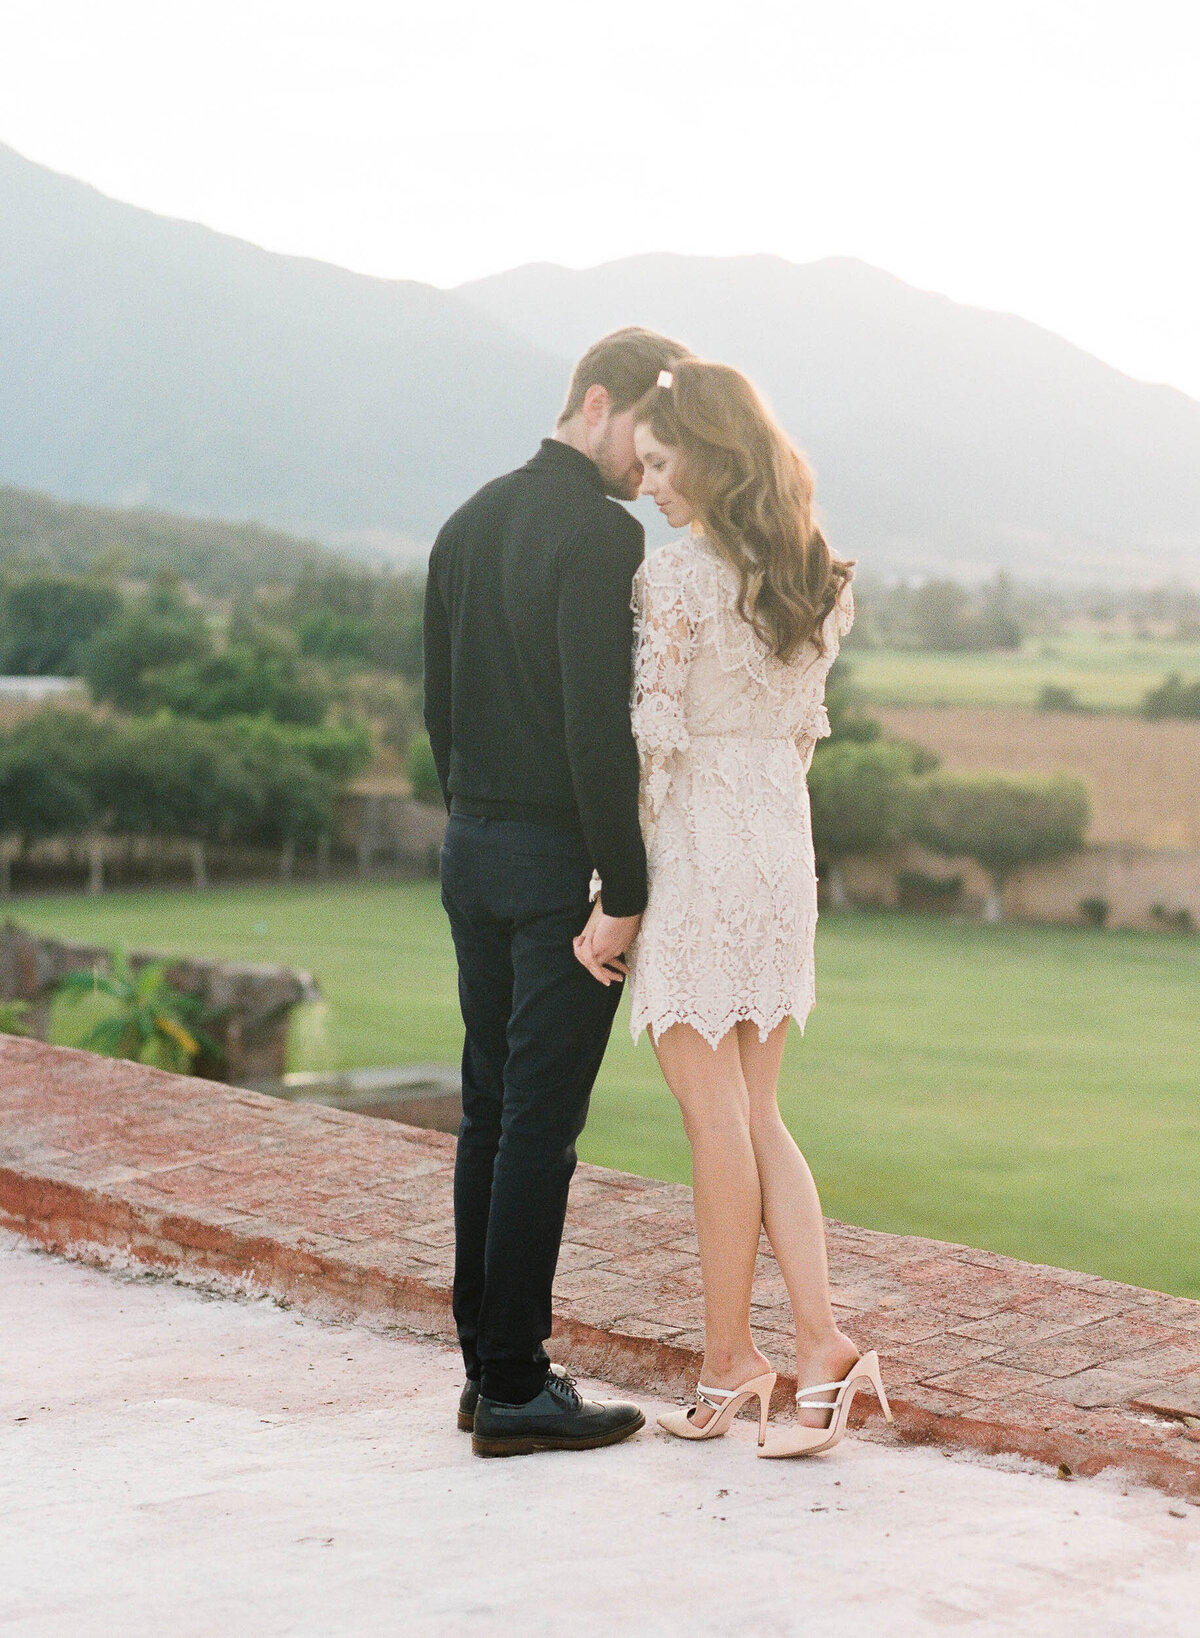 Alexandra-Vonk-photography-engagement-session-Mexico-16